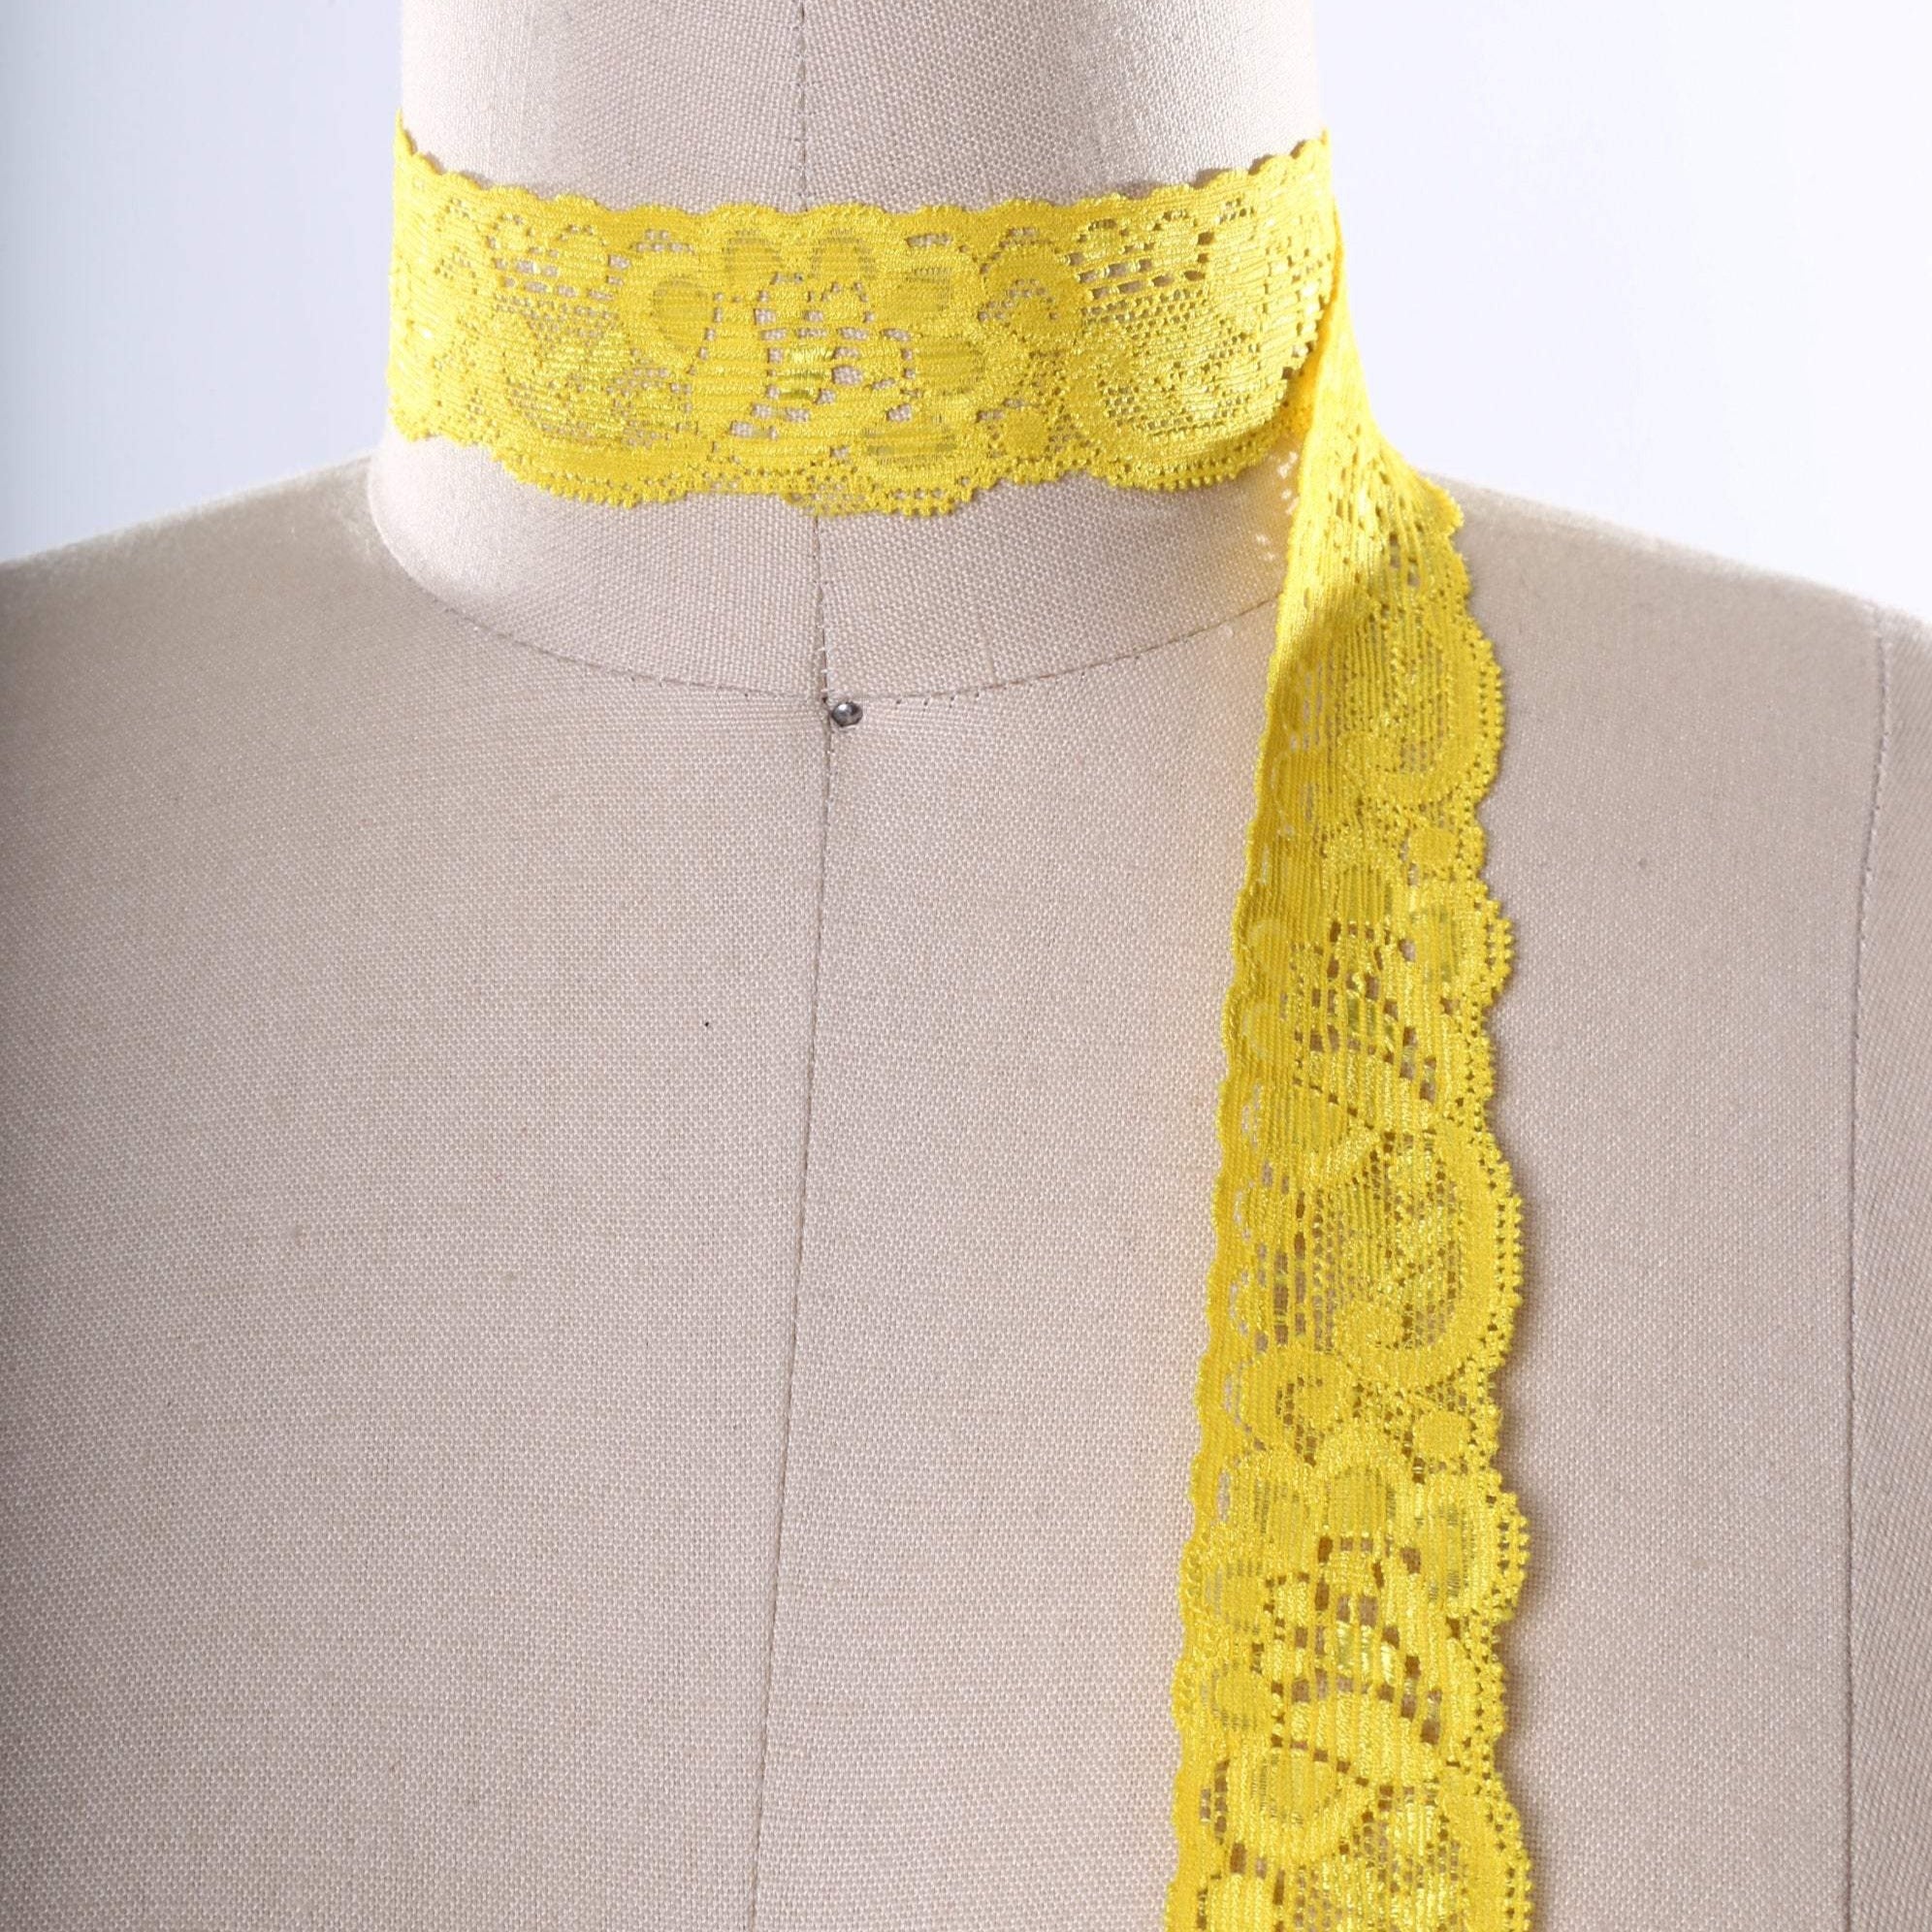 1" Bright Yellow Stretch Floral Elastic Lace Trim